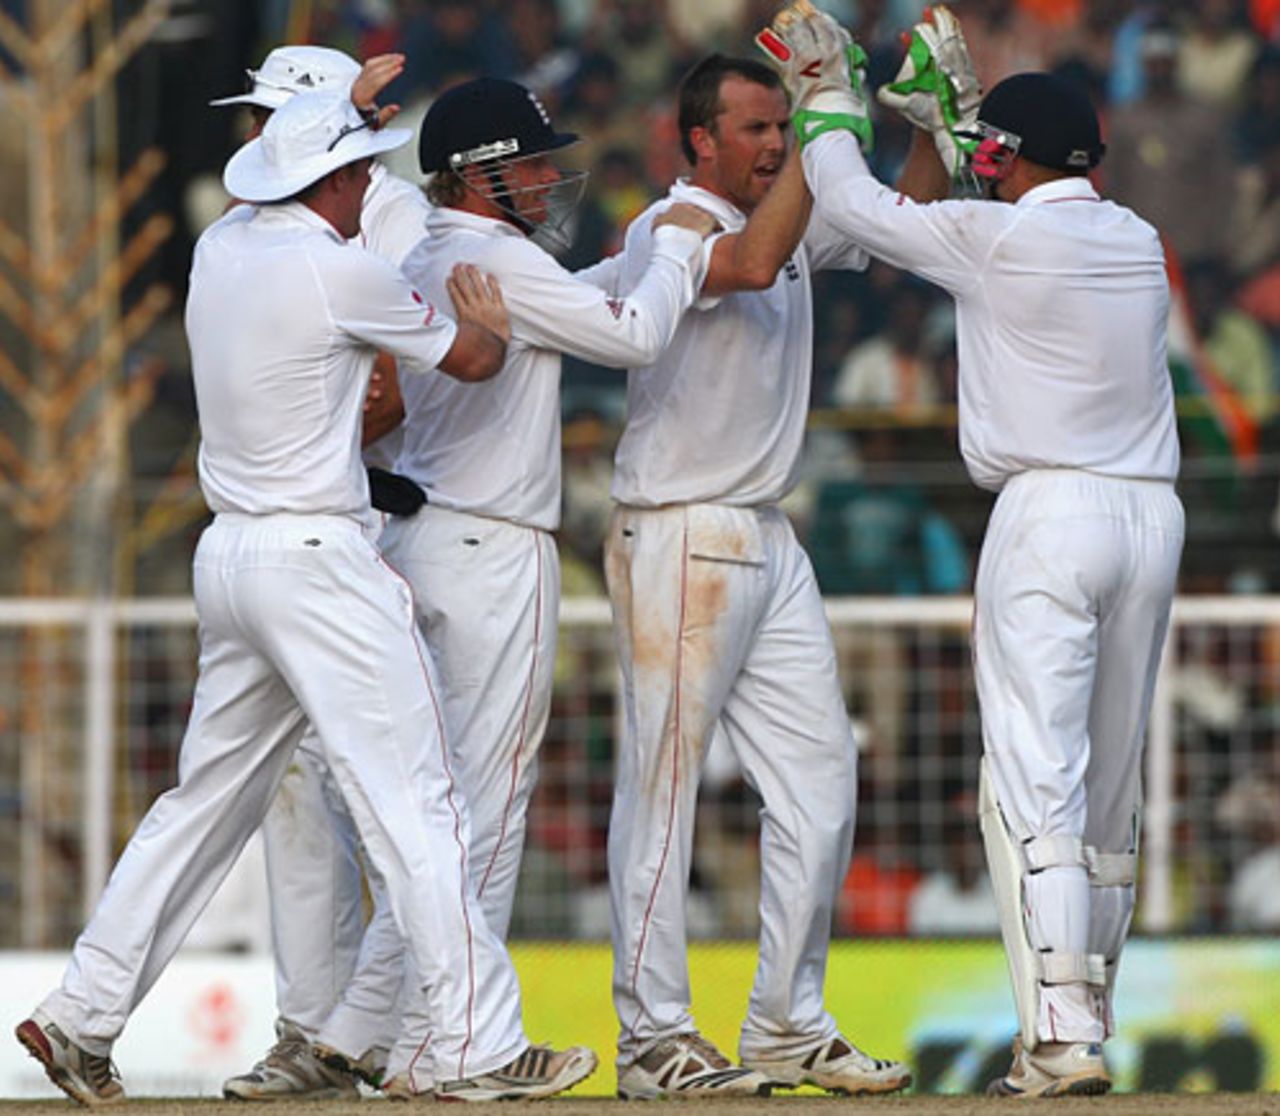 Graeme Swann is congratulated by his team-mates after dismissing Virender Sehwag, India v England, 1st Test, Chennai, 4th day, December 14, 2008